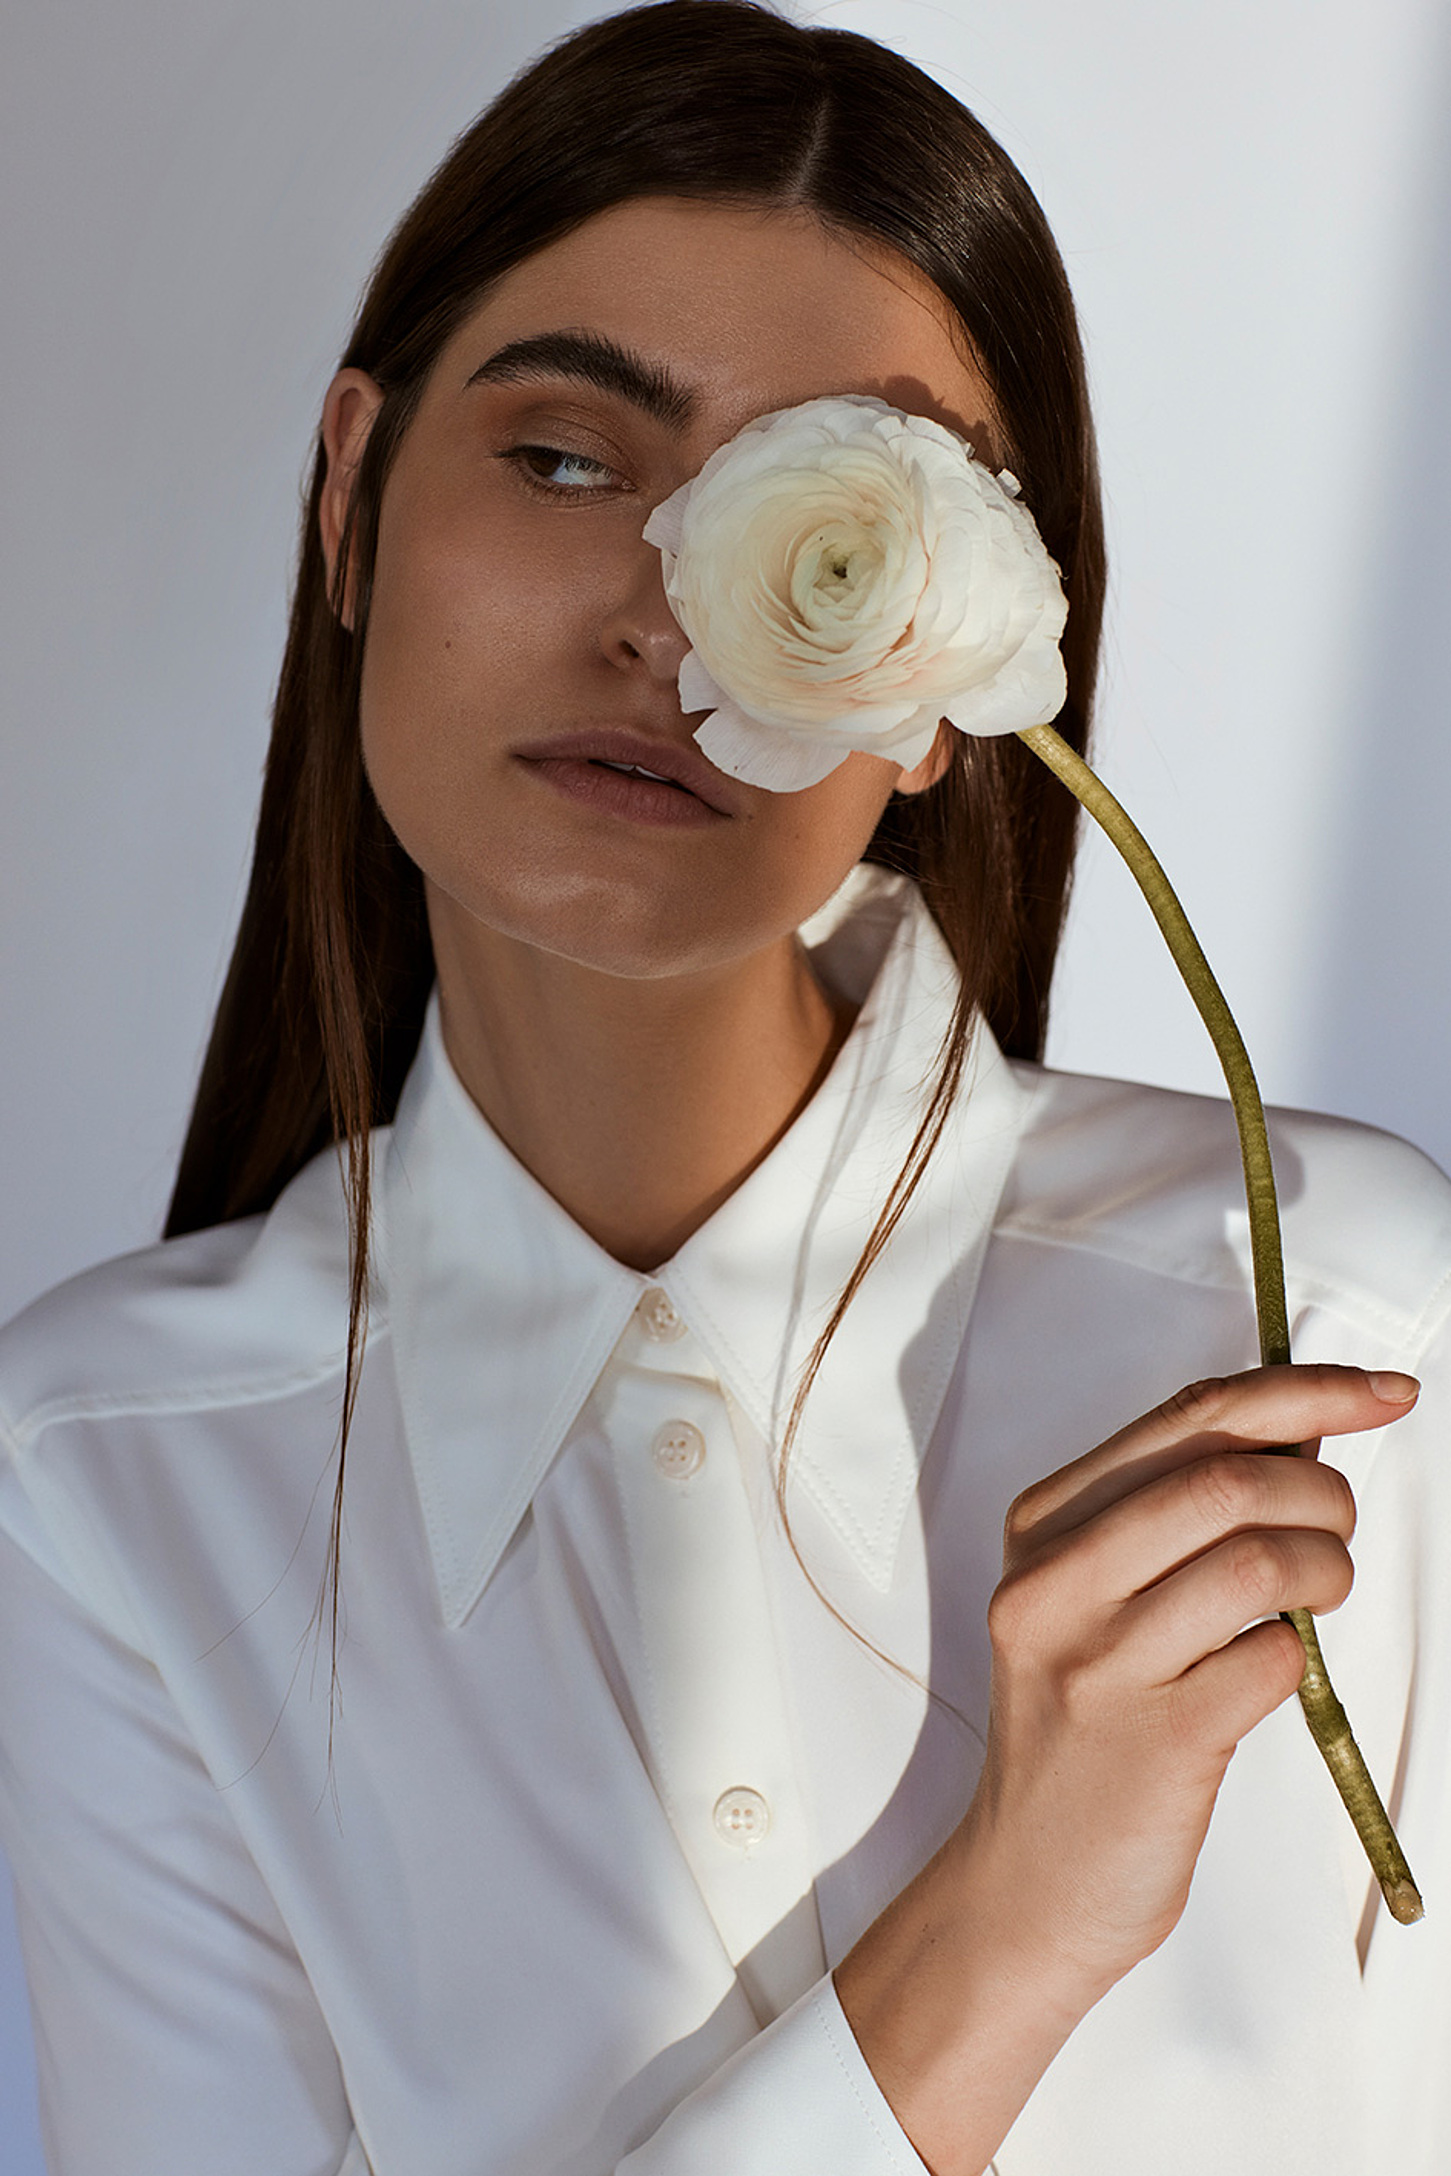 A female model in a white blouse holding a white flower